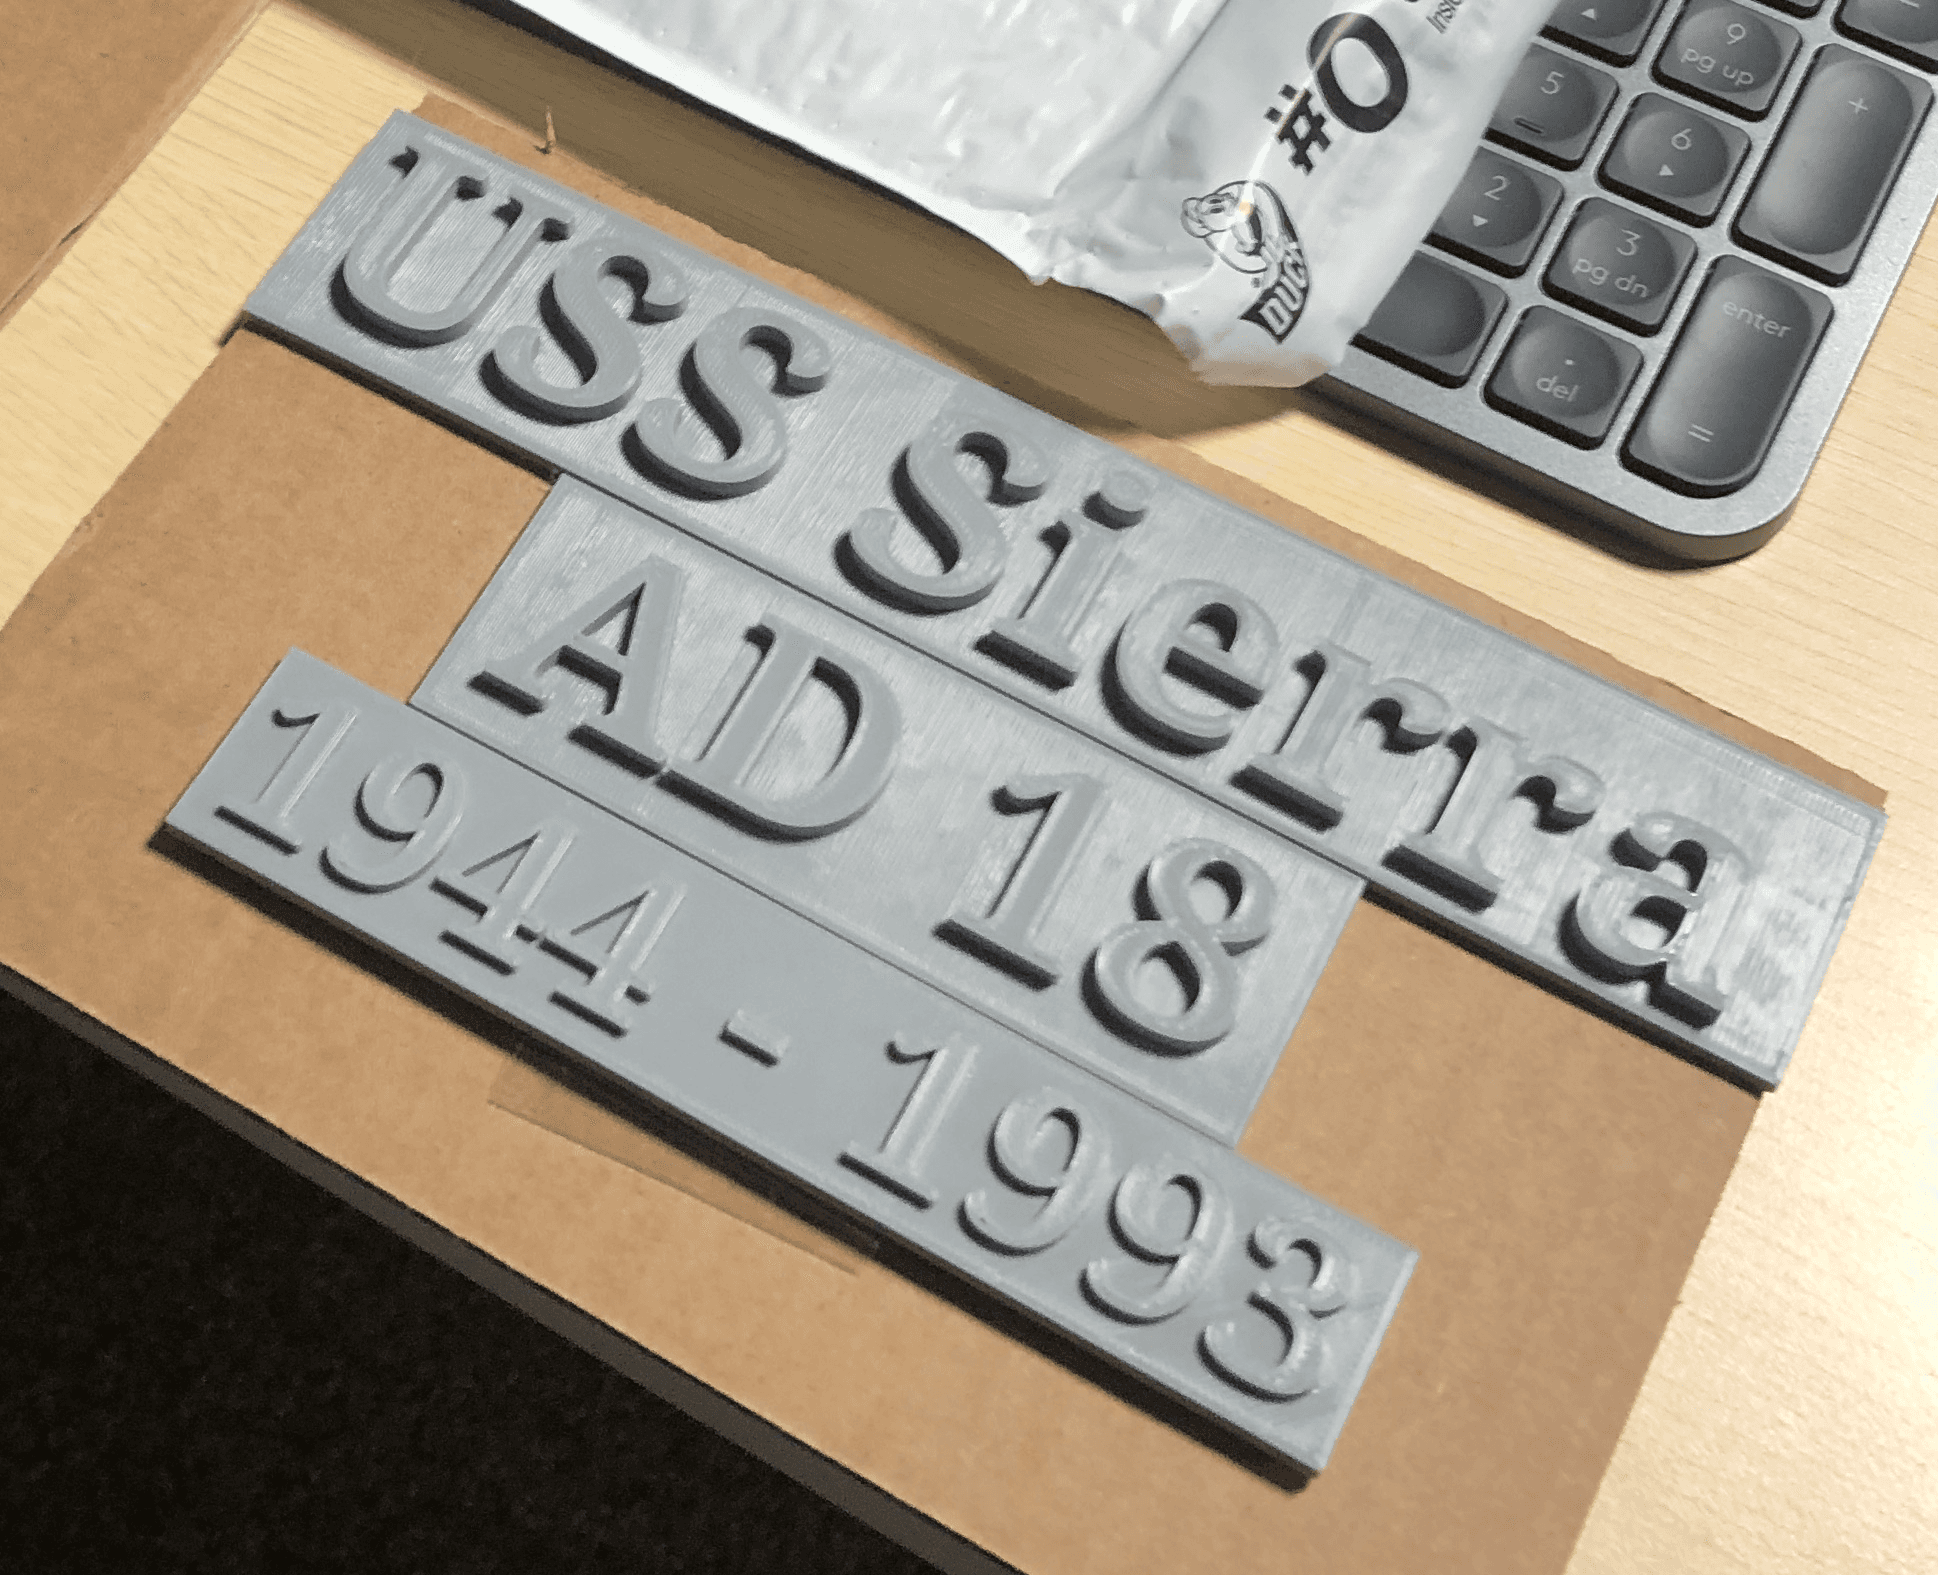 USS Sierra AD 18 - packing to ship ;-) - 3d model